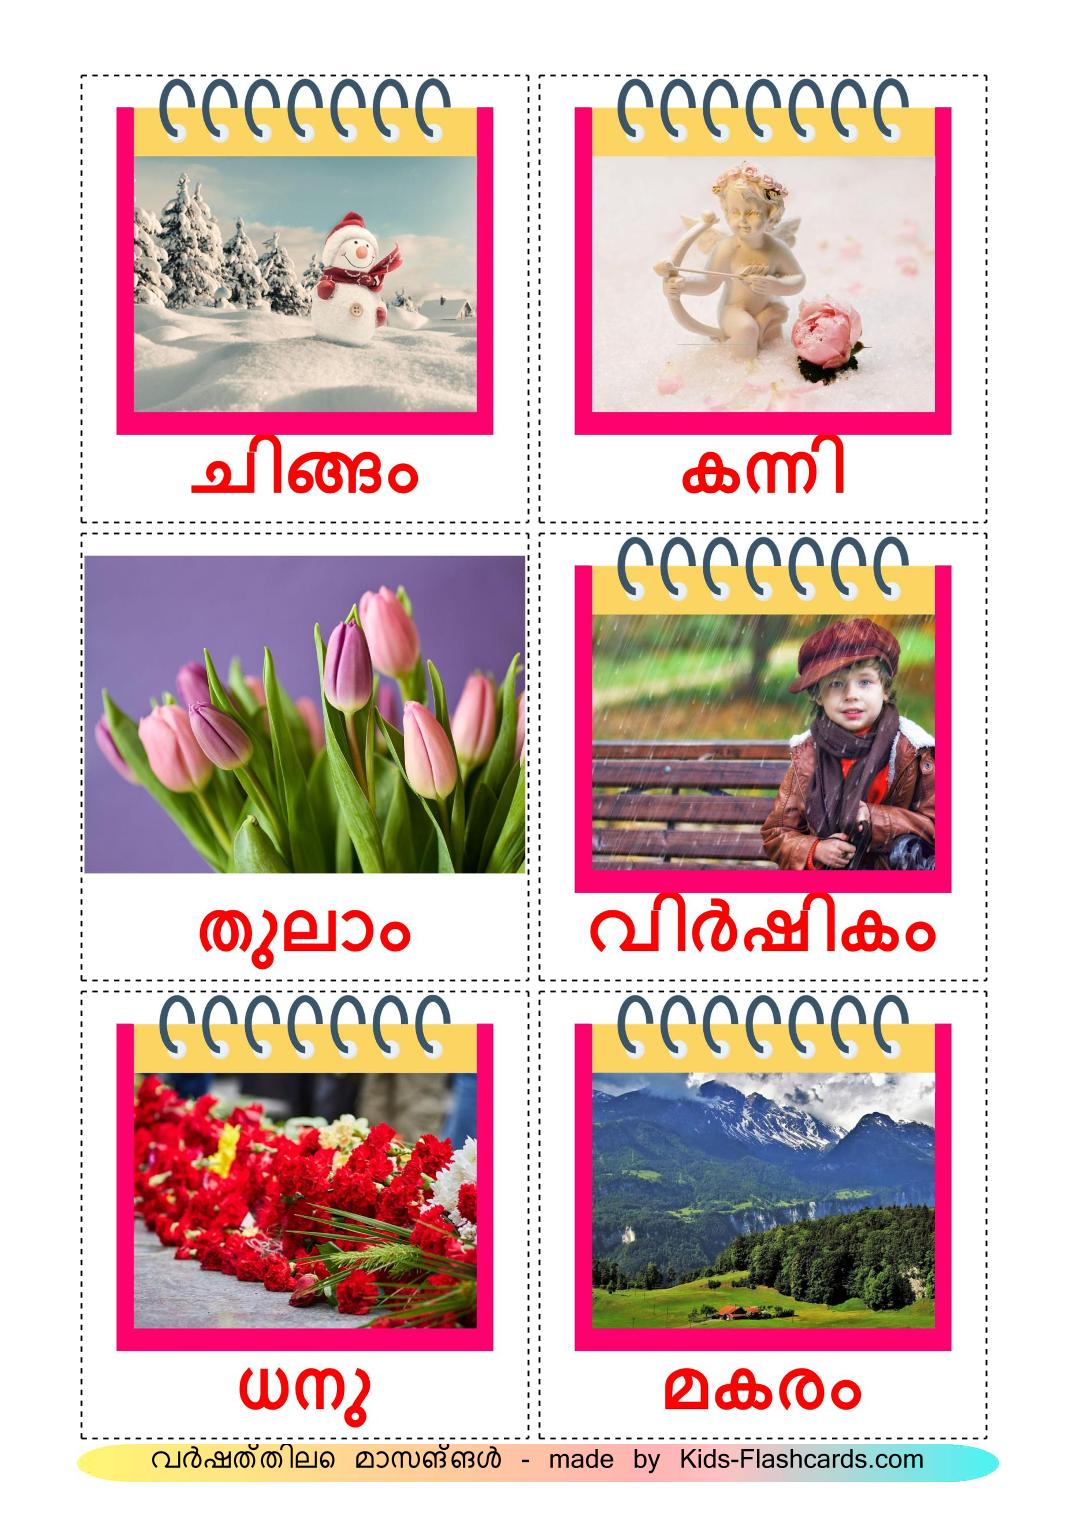 Months of the Year - 12 Free Printable malayalam Flashcards 